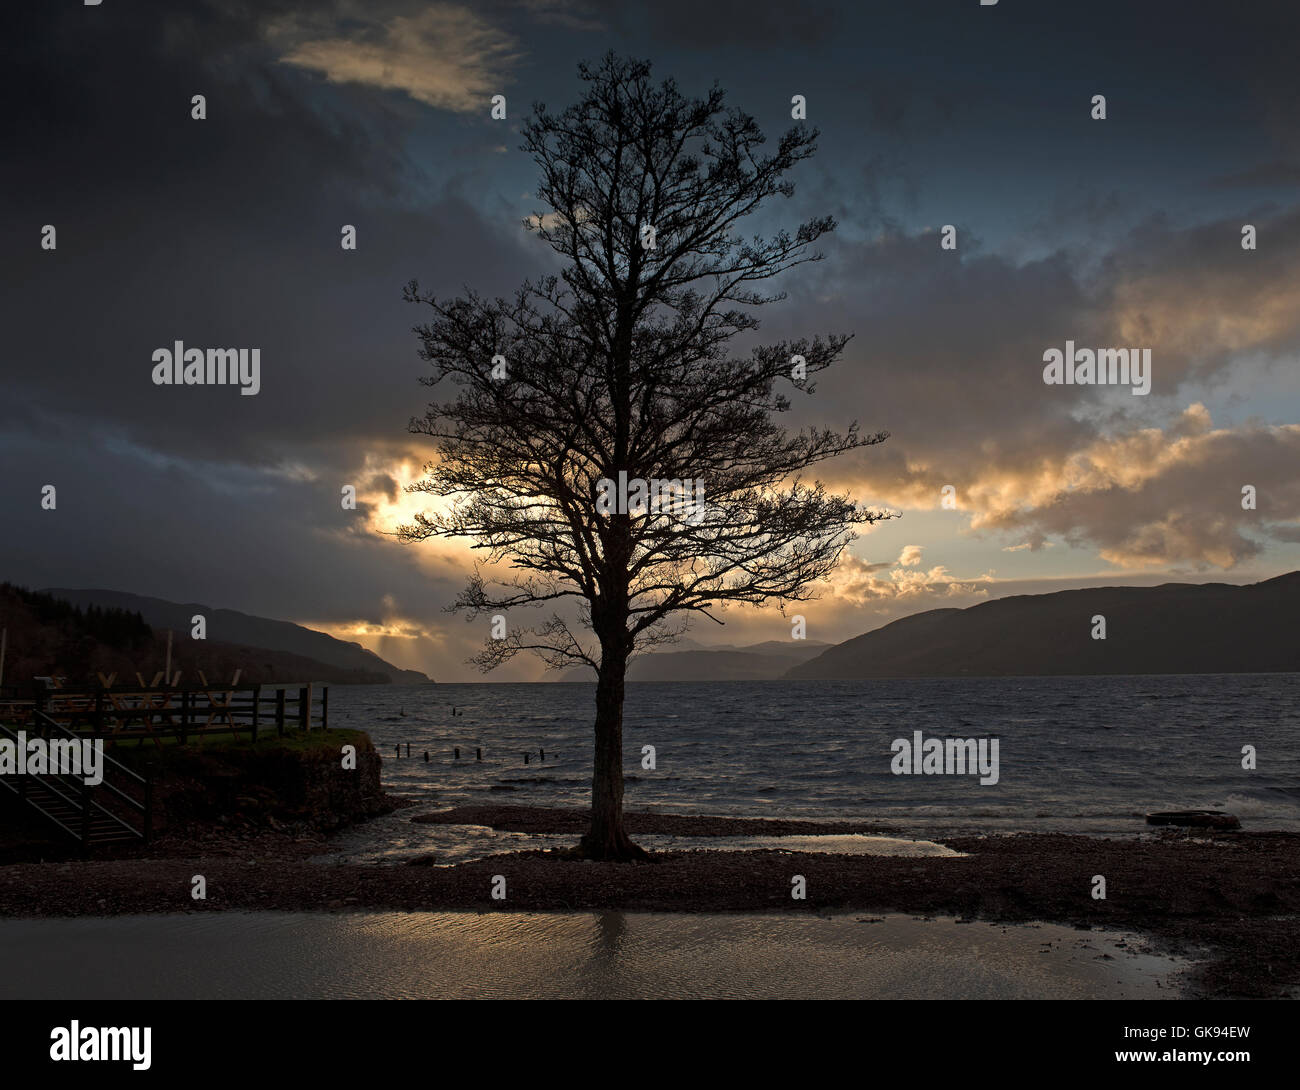 Threatening Skies gather over Loch Ness at Dores in Highland Scotland.  SCO 11,168. Stock Photo